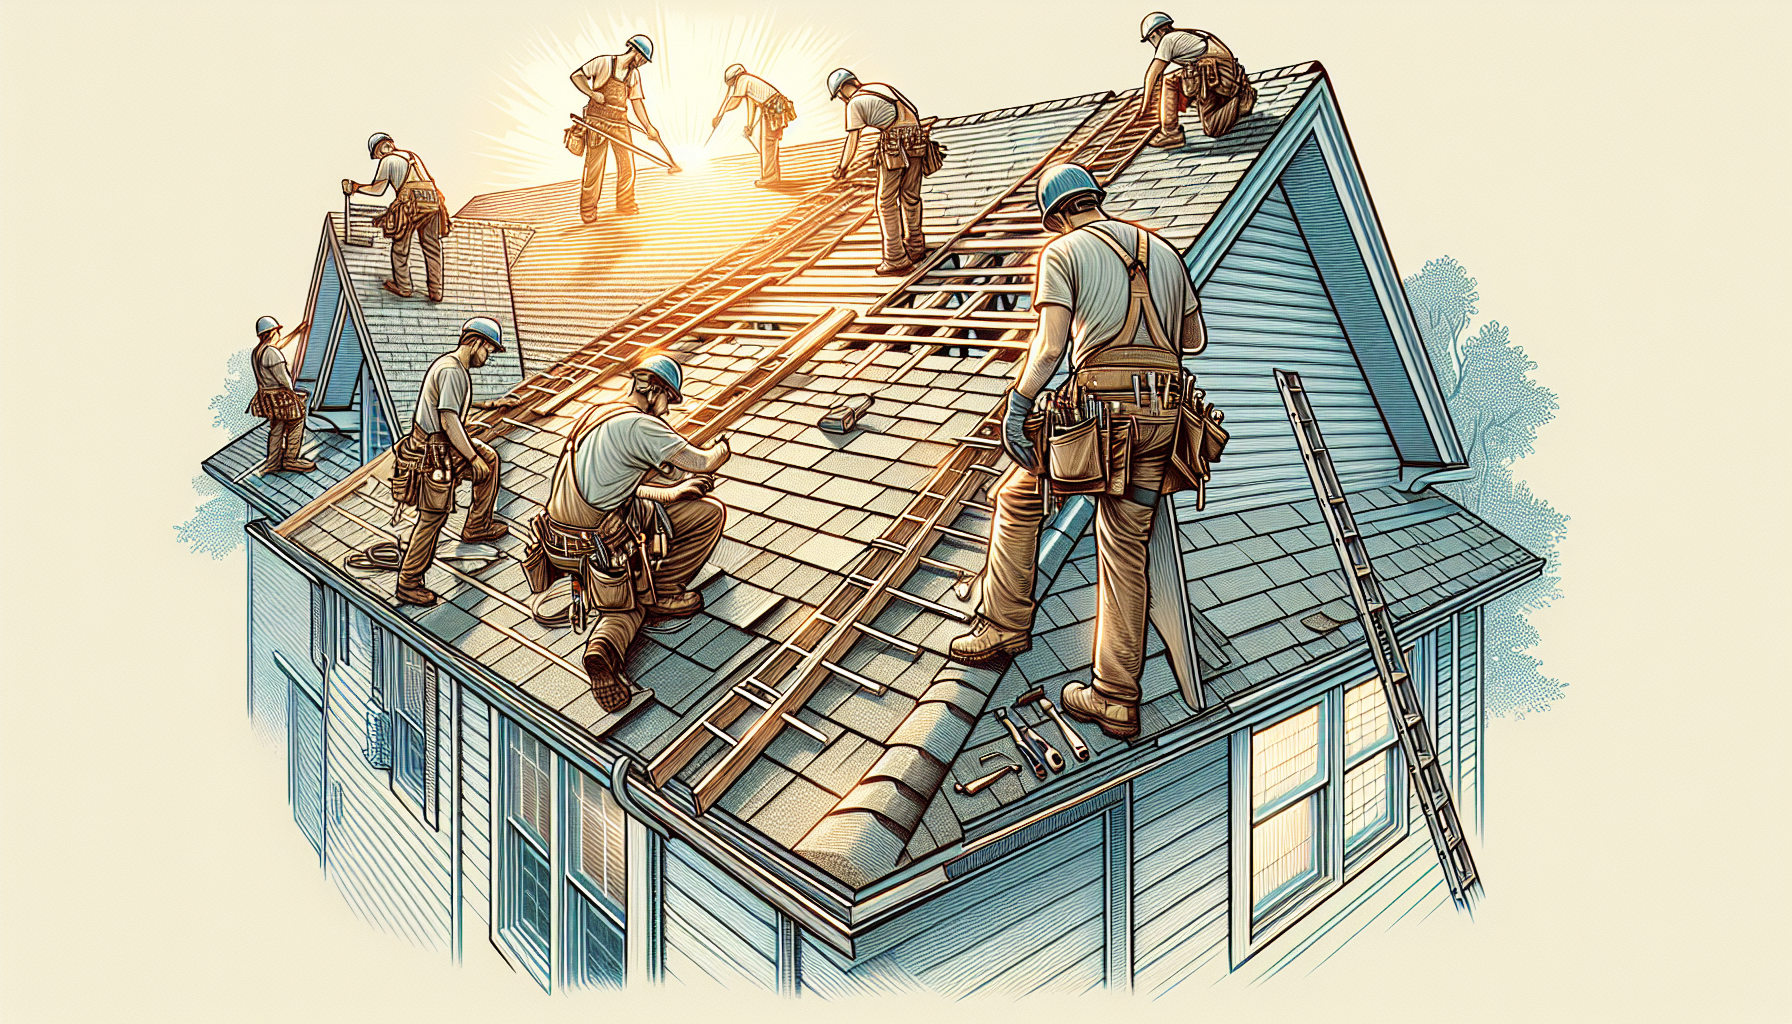 Illustration of a trustworthy roofing contractor